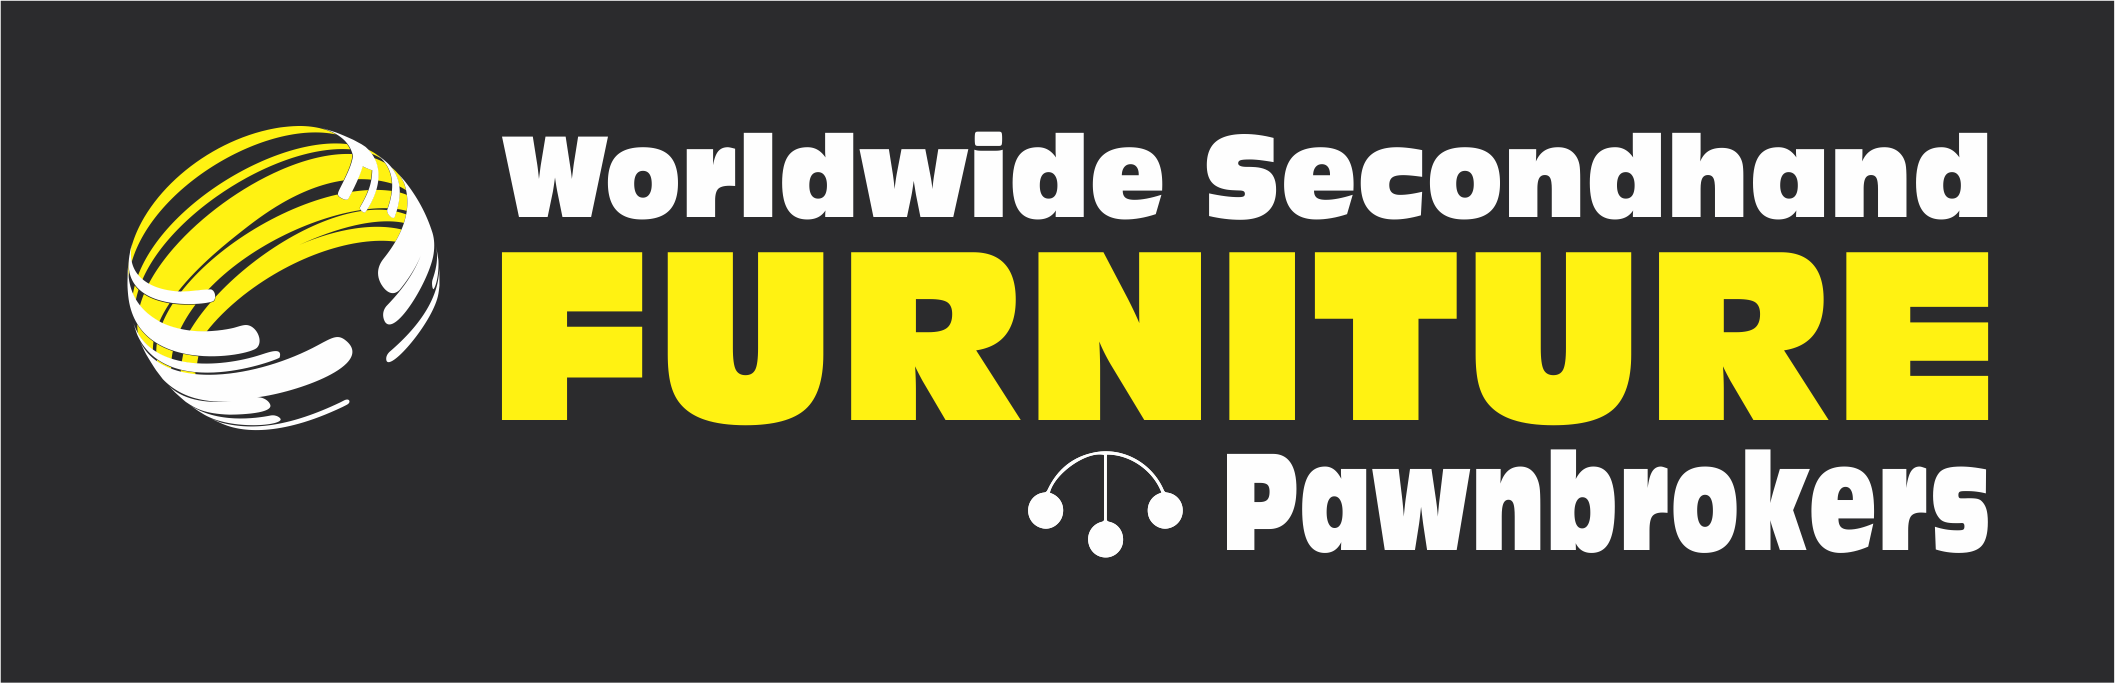 Worldwide Secondhand Furniture and Pawnbrokers logo